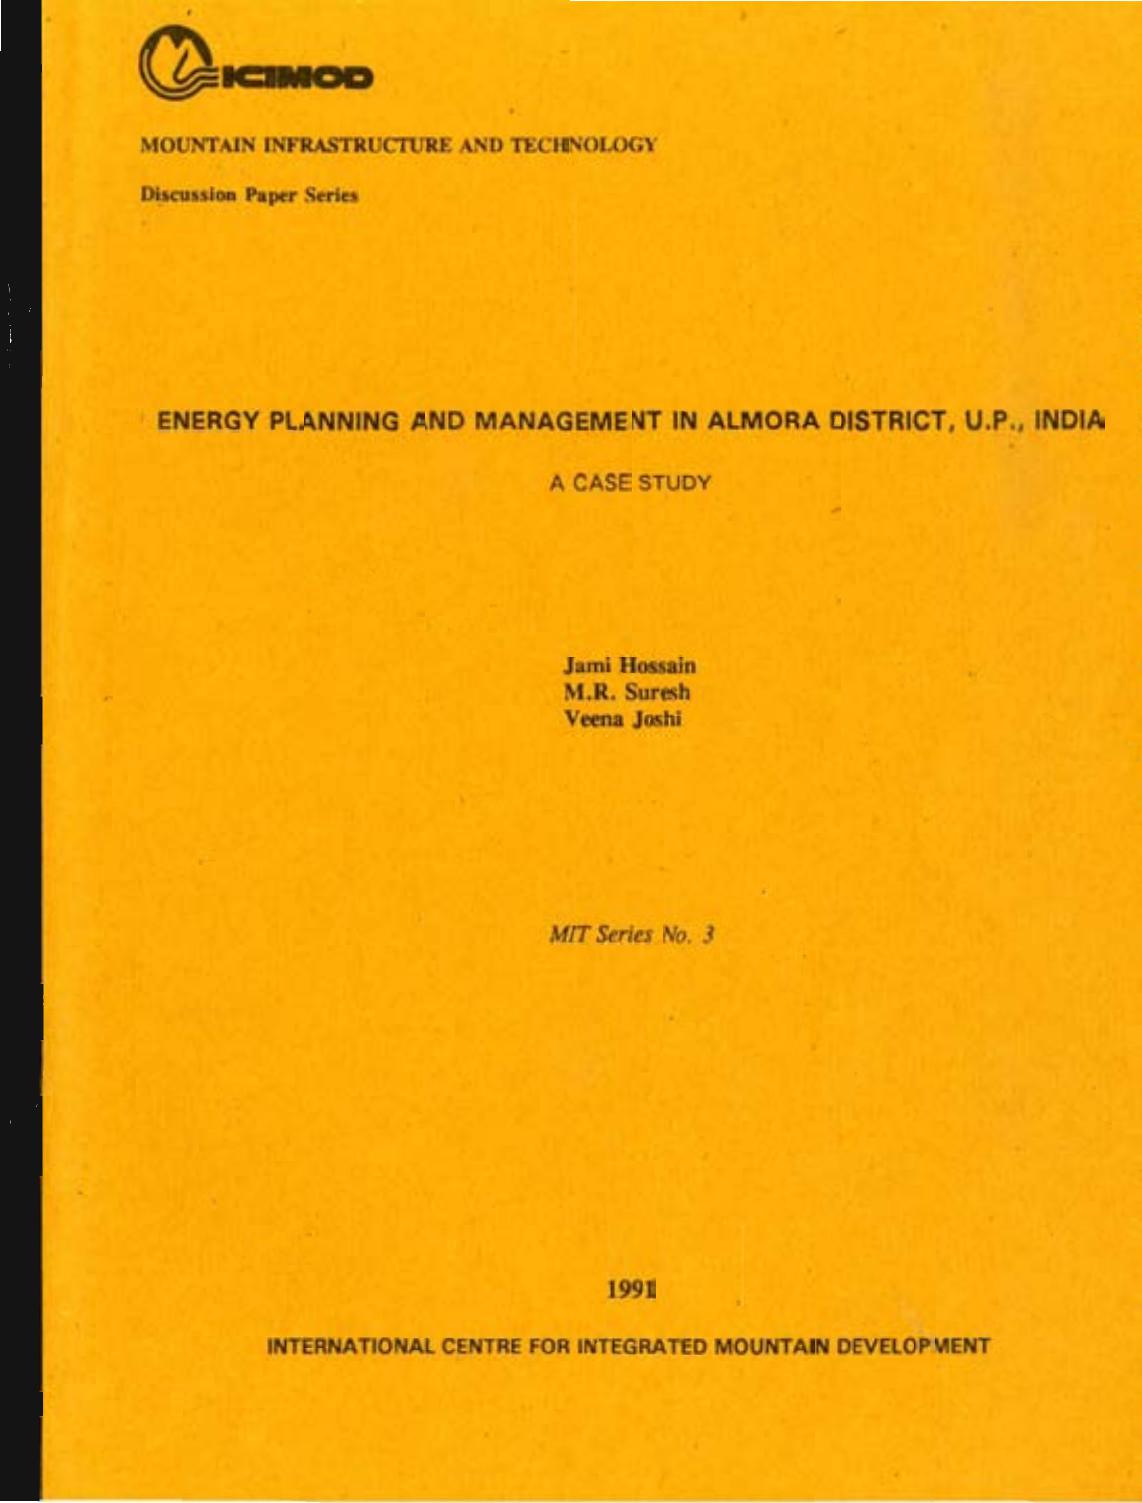 Energy Planning And Management In Almora District, U.P. India; A Case Study